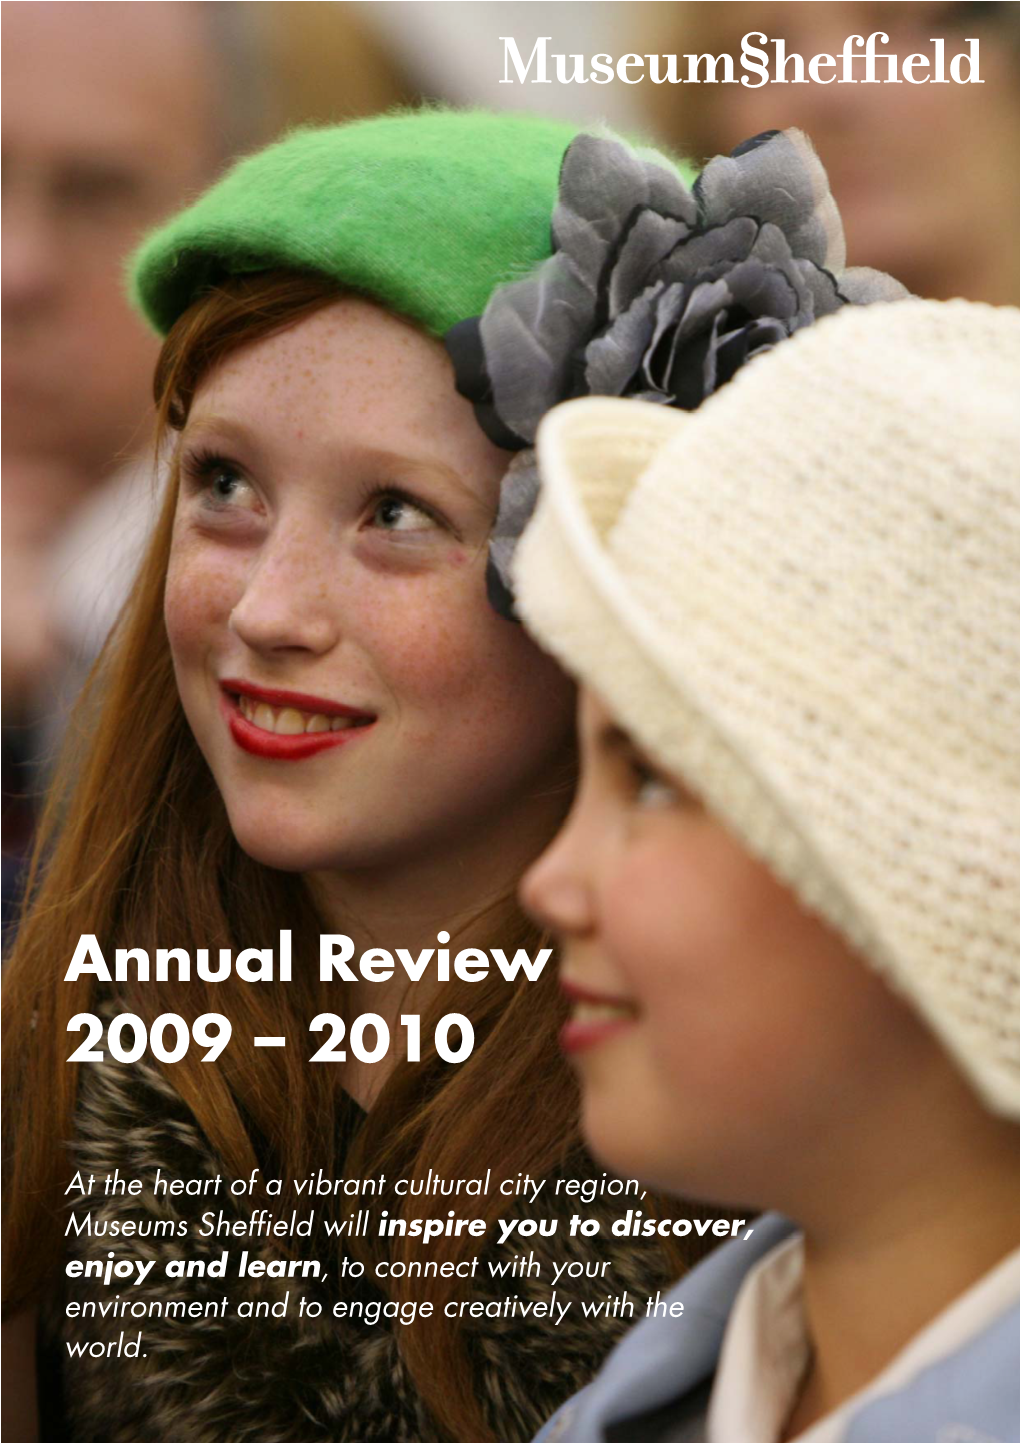 Annual Review 2007 – 2009